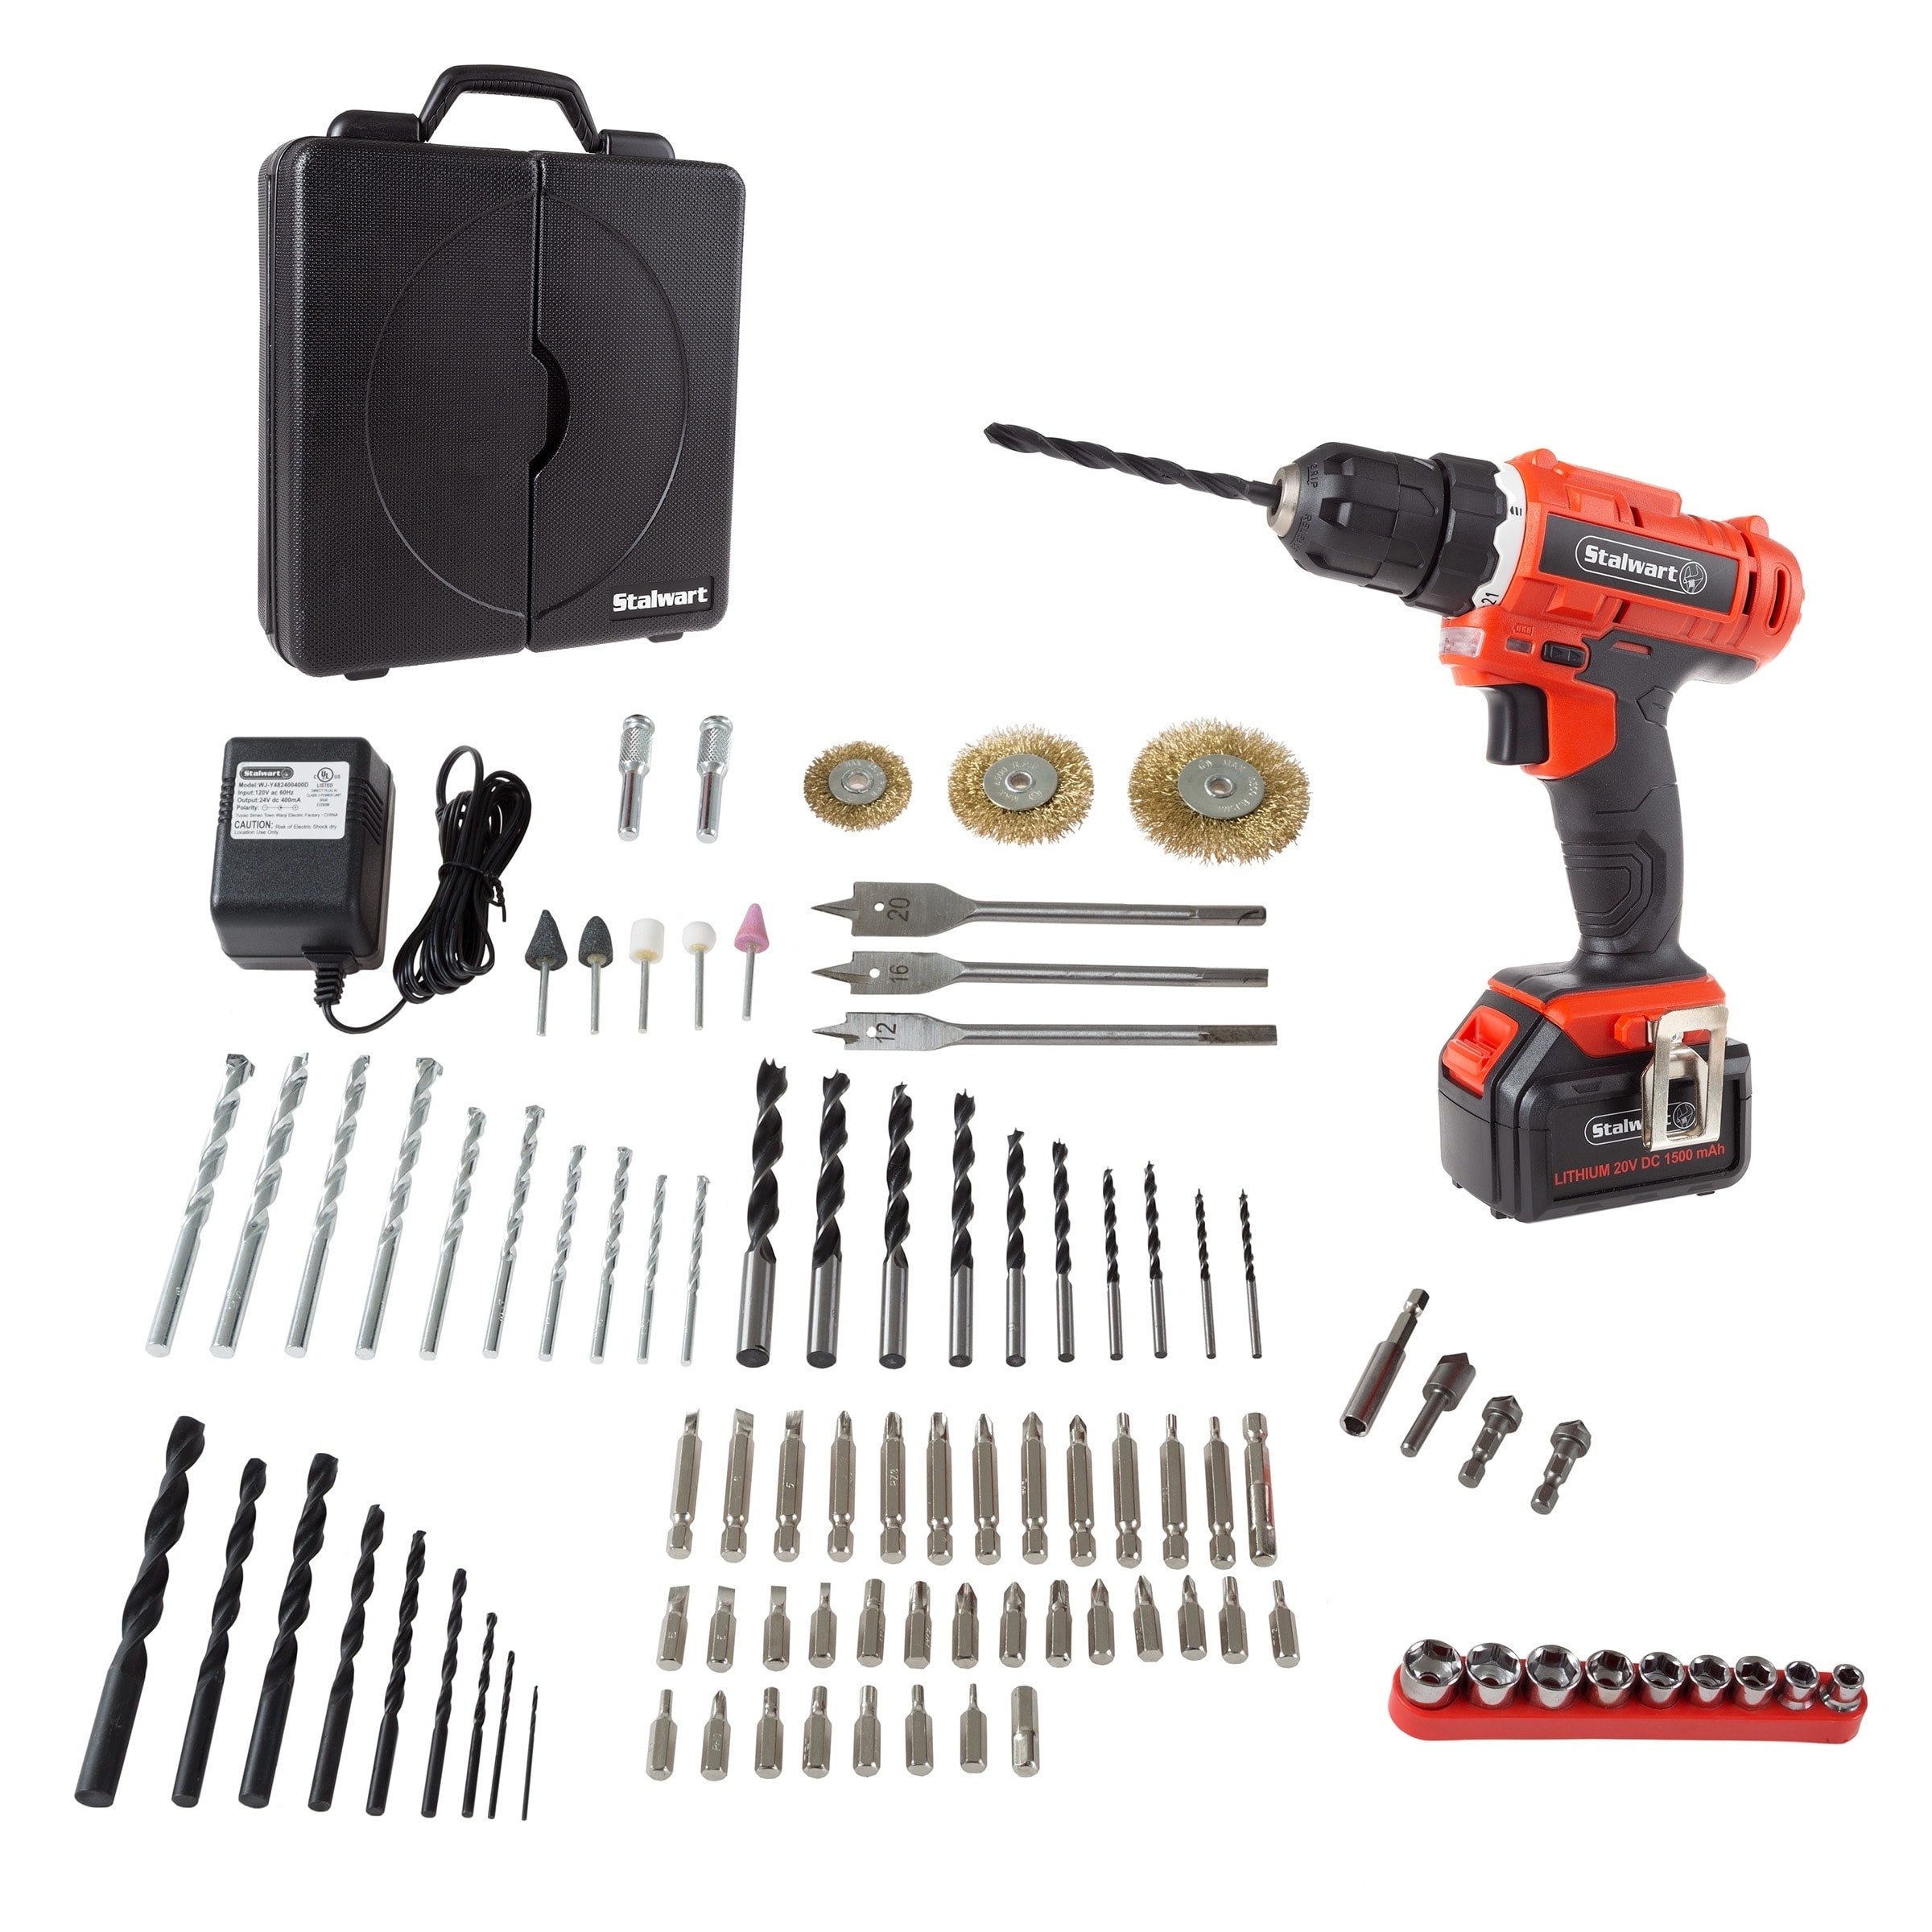 20V Cordless Drill with Rechargeable Battery and 89 Piece 